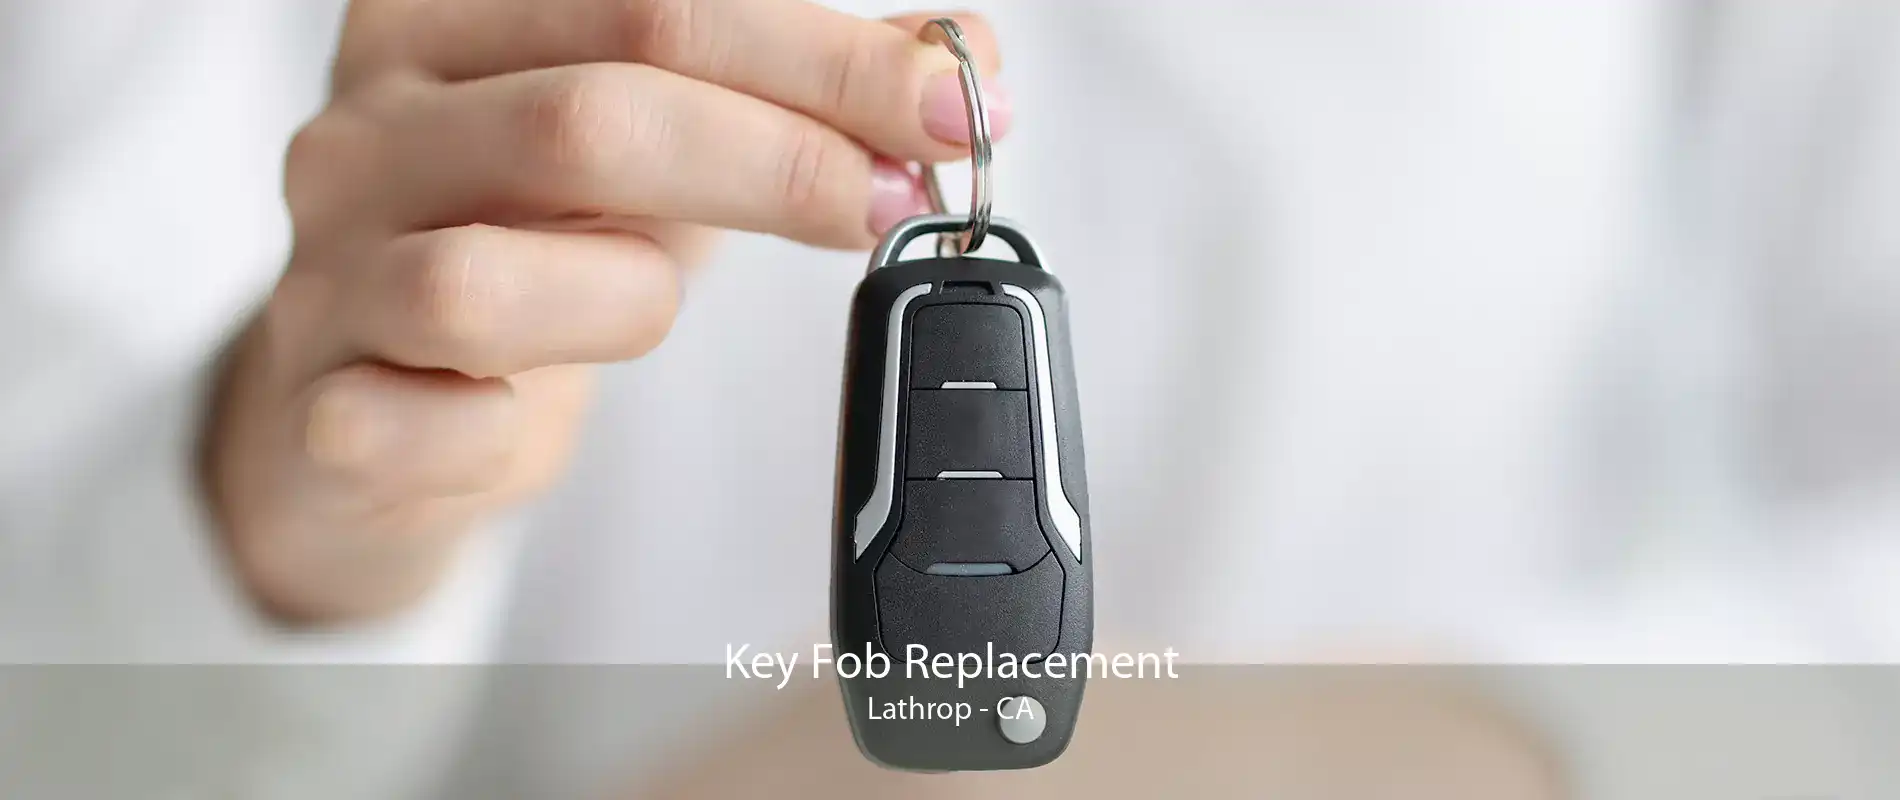 Key Fob Replacement Lathrop - CA